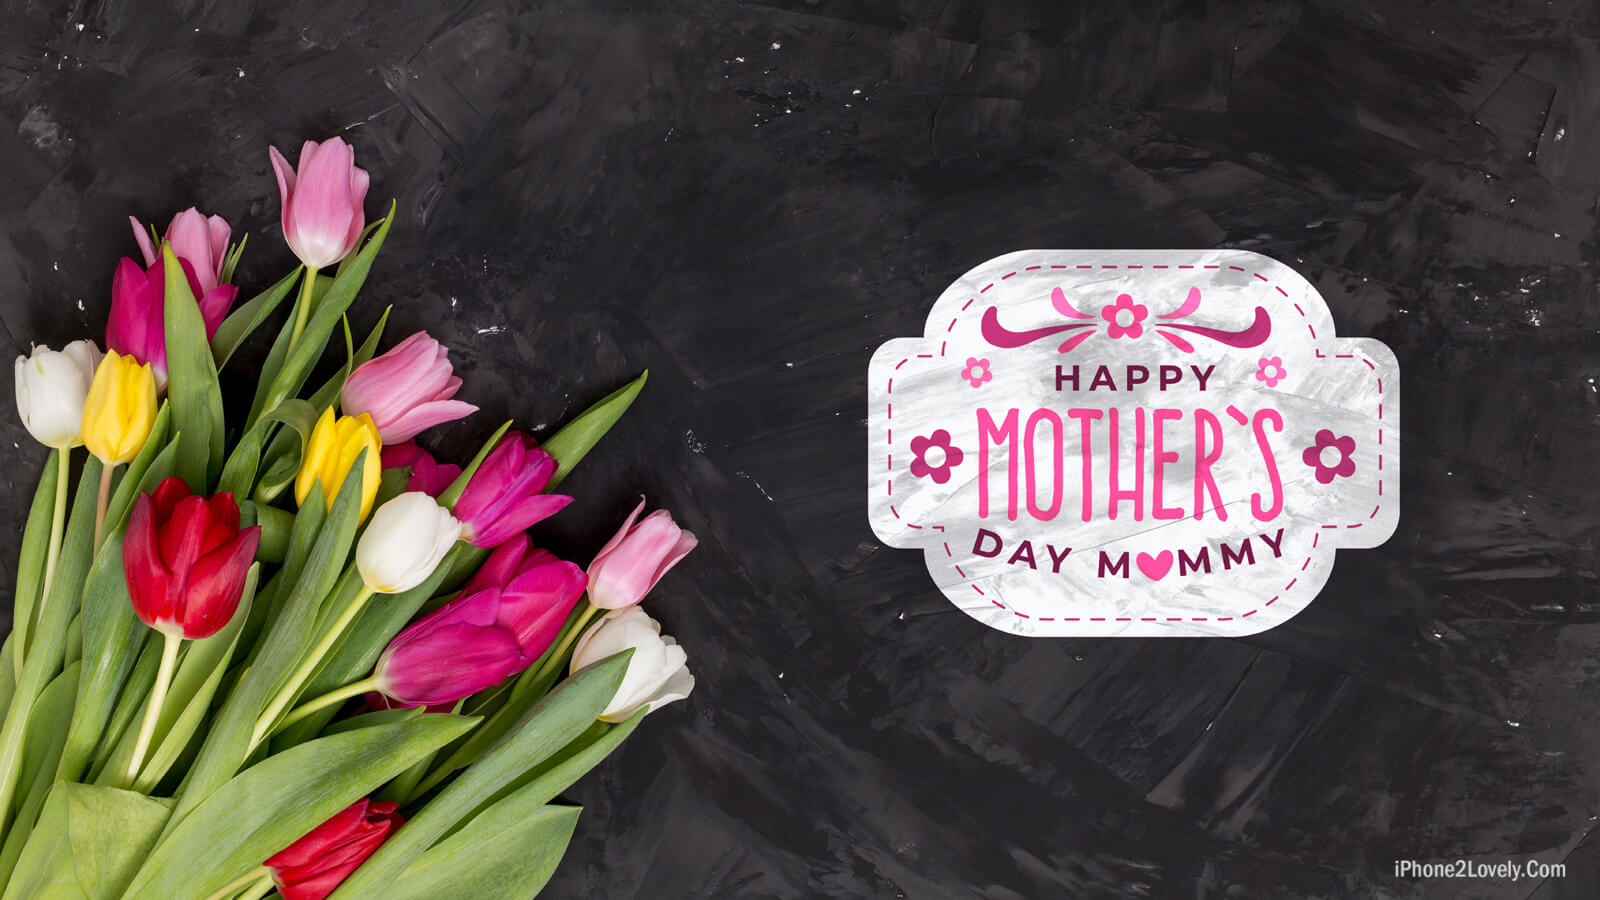 Happy Mothers Day 2019 Image